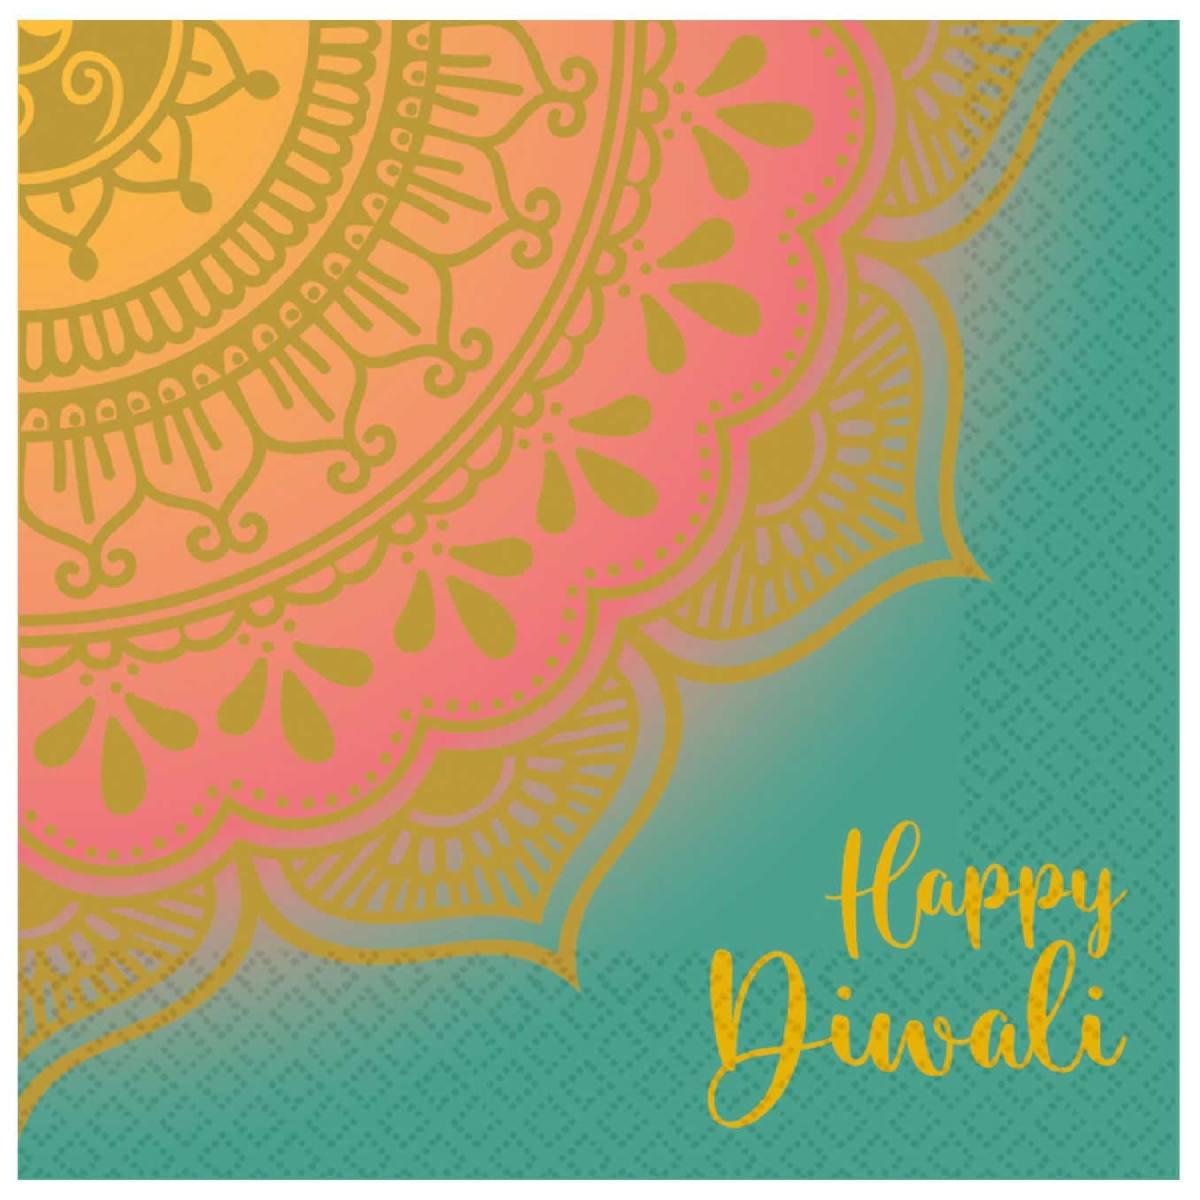 Diwali Celebrations Luncheon Napkins 33cm pk16 by Amscan 9914459 available here at Karnival Costumes online party shop